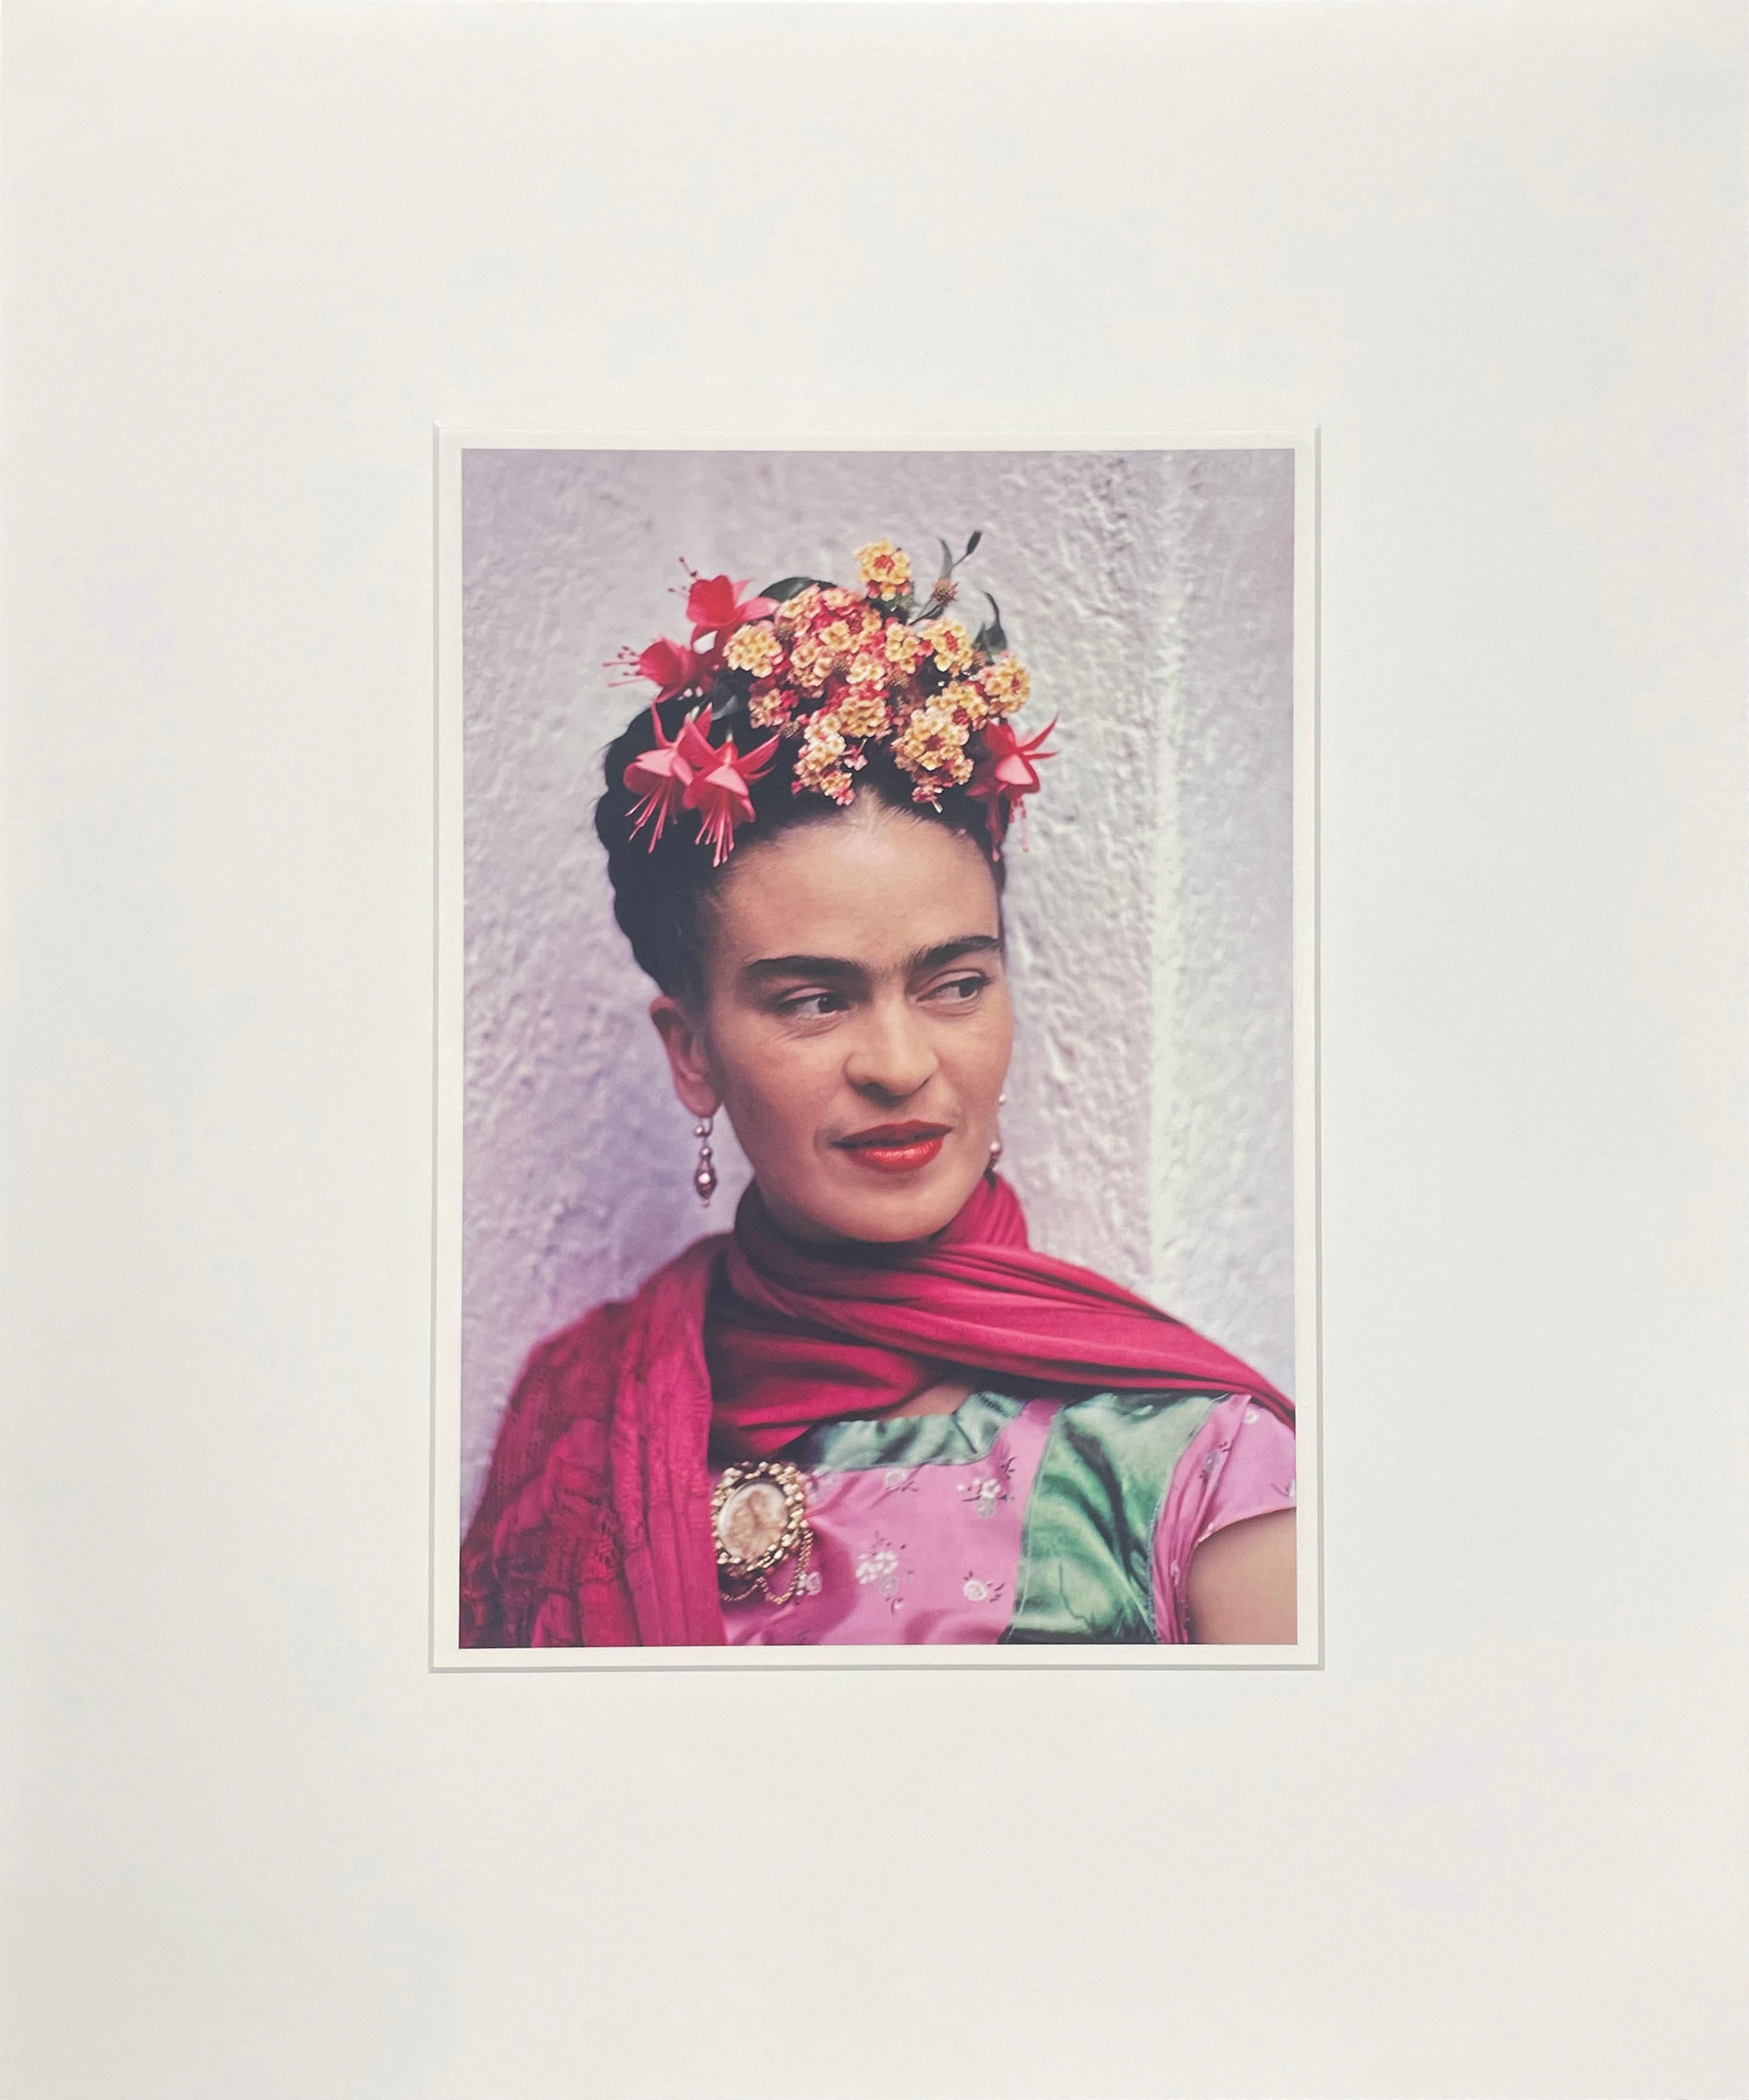 Frida in Pink and Green Blouse by Nickolas Muray, 1938, Carbon Pigment Print For Sale 1